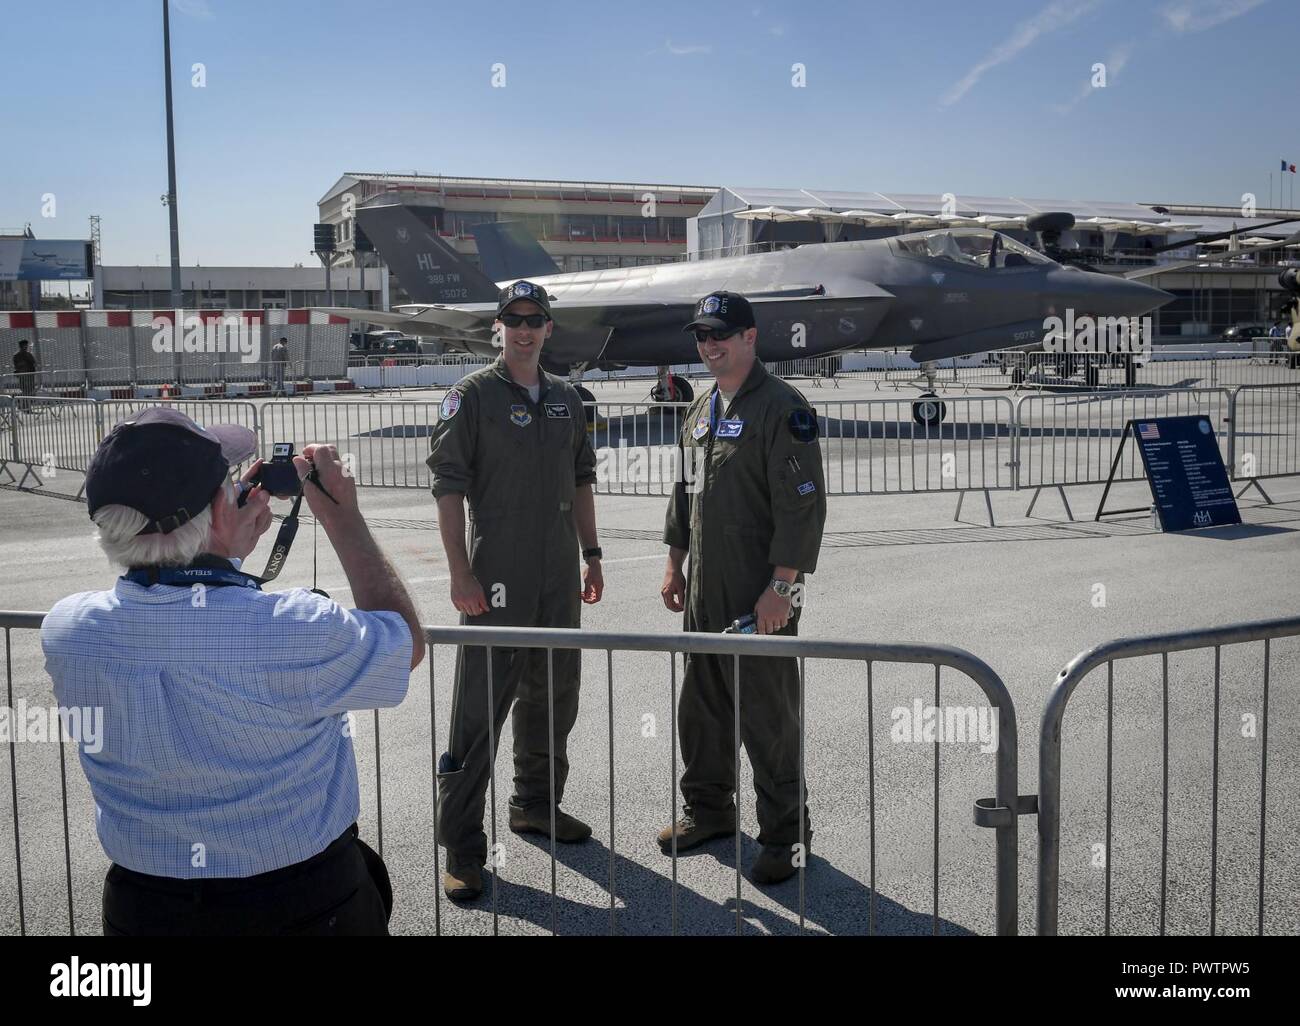 F-35A Lighting II pilots from Hill Air Force Base, Utah, pose for a photo in the U.S. corral at the Paris Air Show June 20, 2017 at Le Bourget, France. Aside from the F-35, the U.S. is displaying an F-16 Fighting Falcon, a CH-47 Chinook, an AH-64 Apache, a P-8 Poseidon, a C-130J Super Hercules and a CV-22 Osprey. The Paris Air Show offers the U.S. a unique opportunity to display their leadership in aerospeace and technology on an international scale. Stock Photo